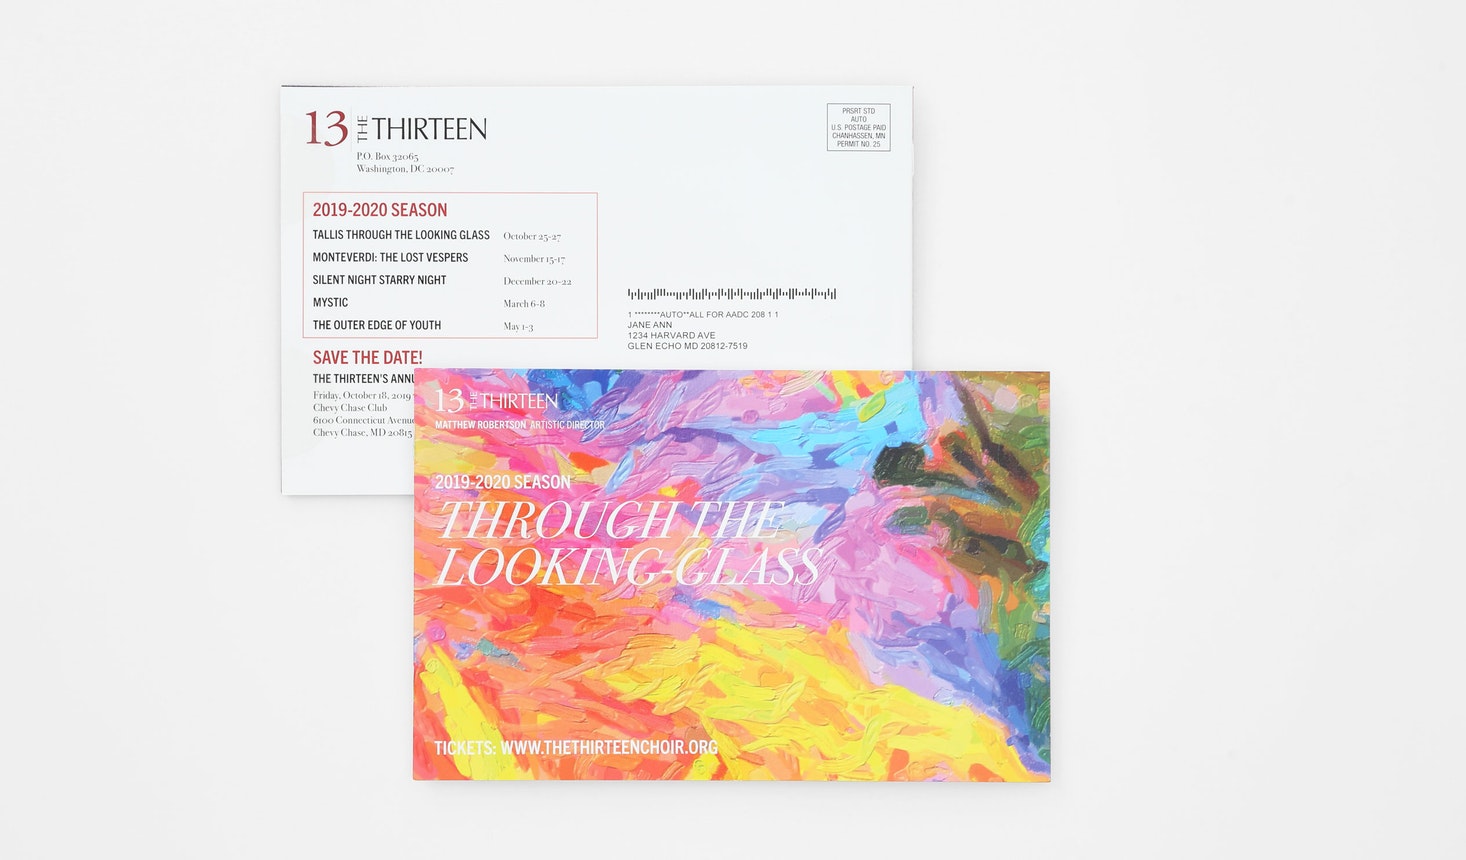 A direct mail postcard printed with a bright, colorful design on the front and event listings on the back.